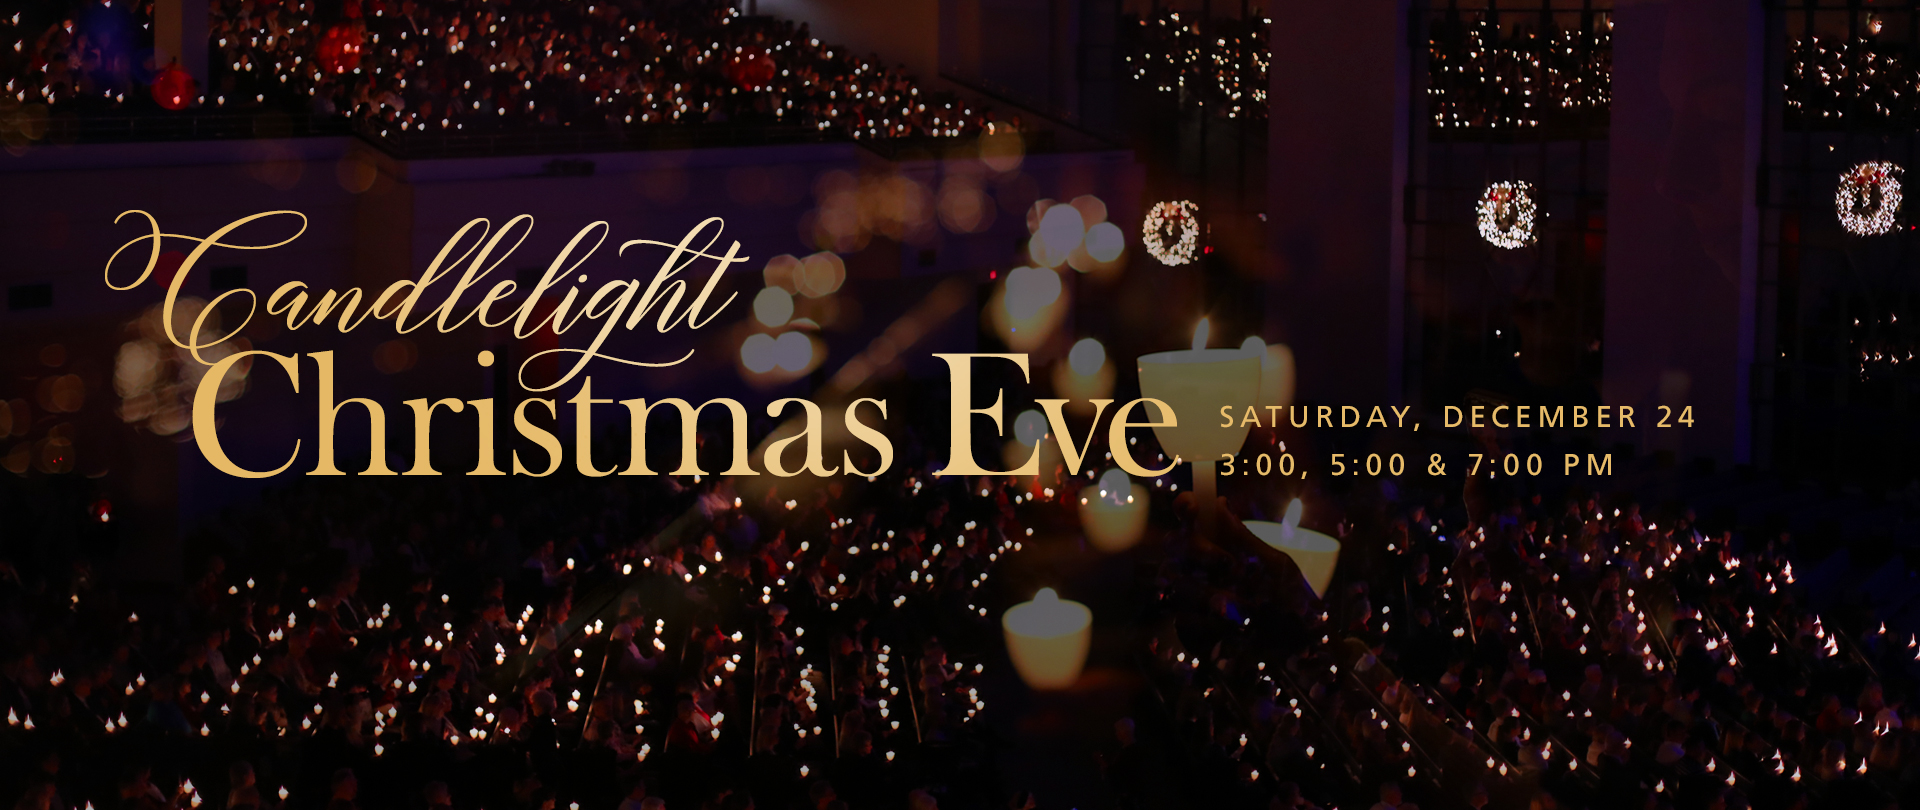 Candlelight Christmas Eve
"The Magnificent Christ"
Saturday, December 24
Watch again!
